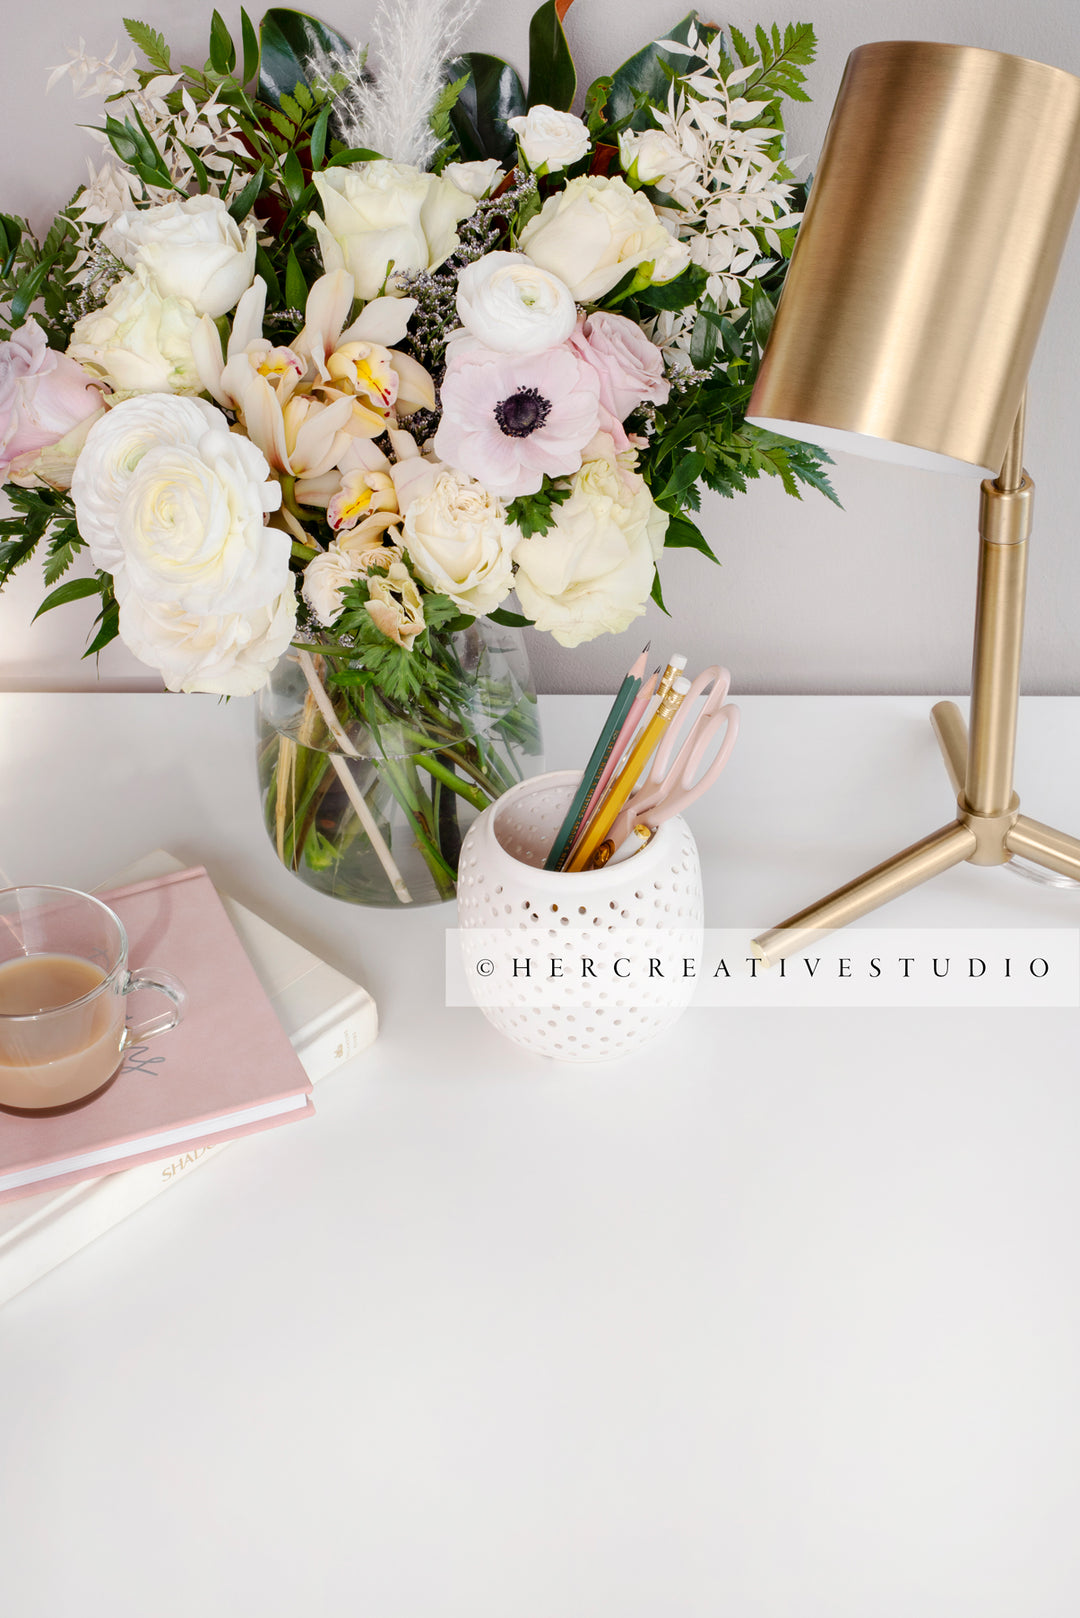 Flowers, Gold Lamp & Pencil Holder on Workspace, Styled Stock Image